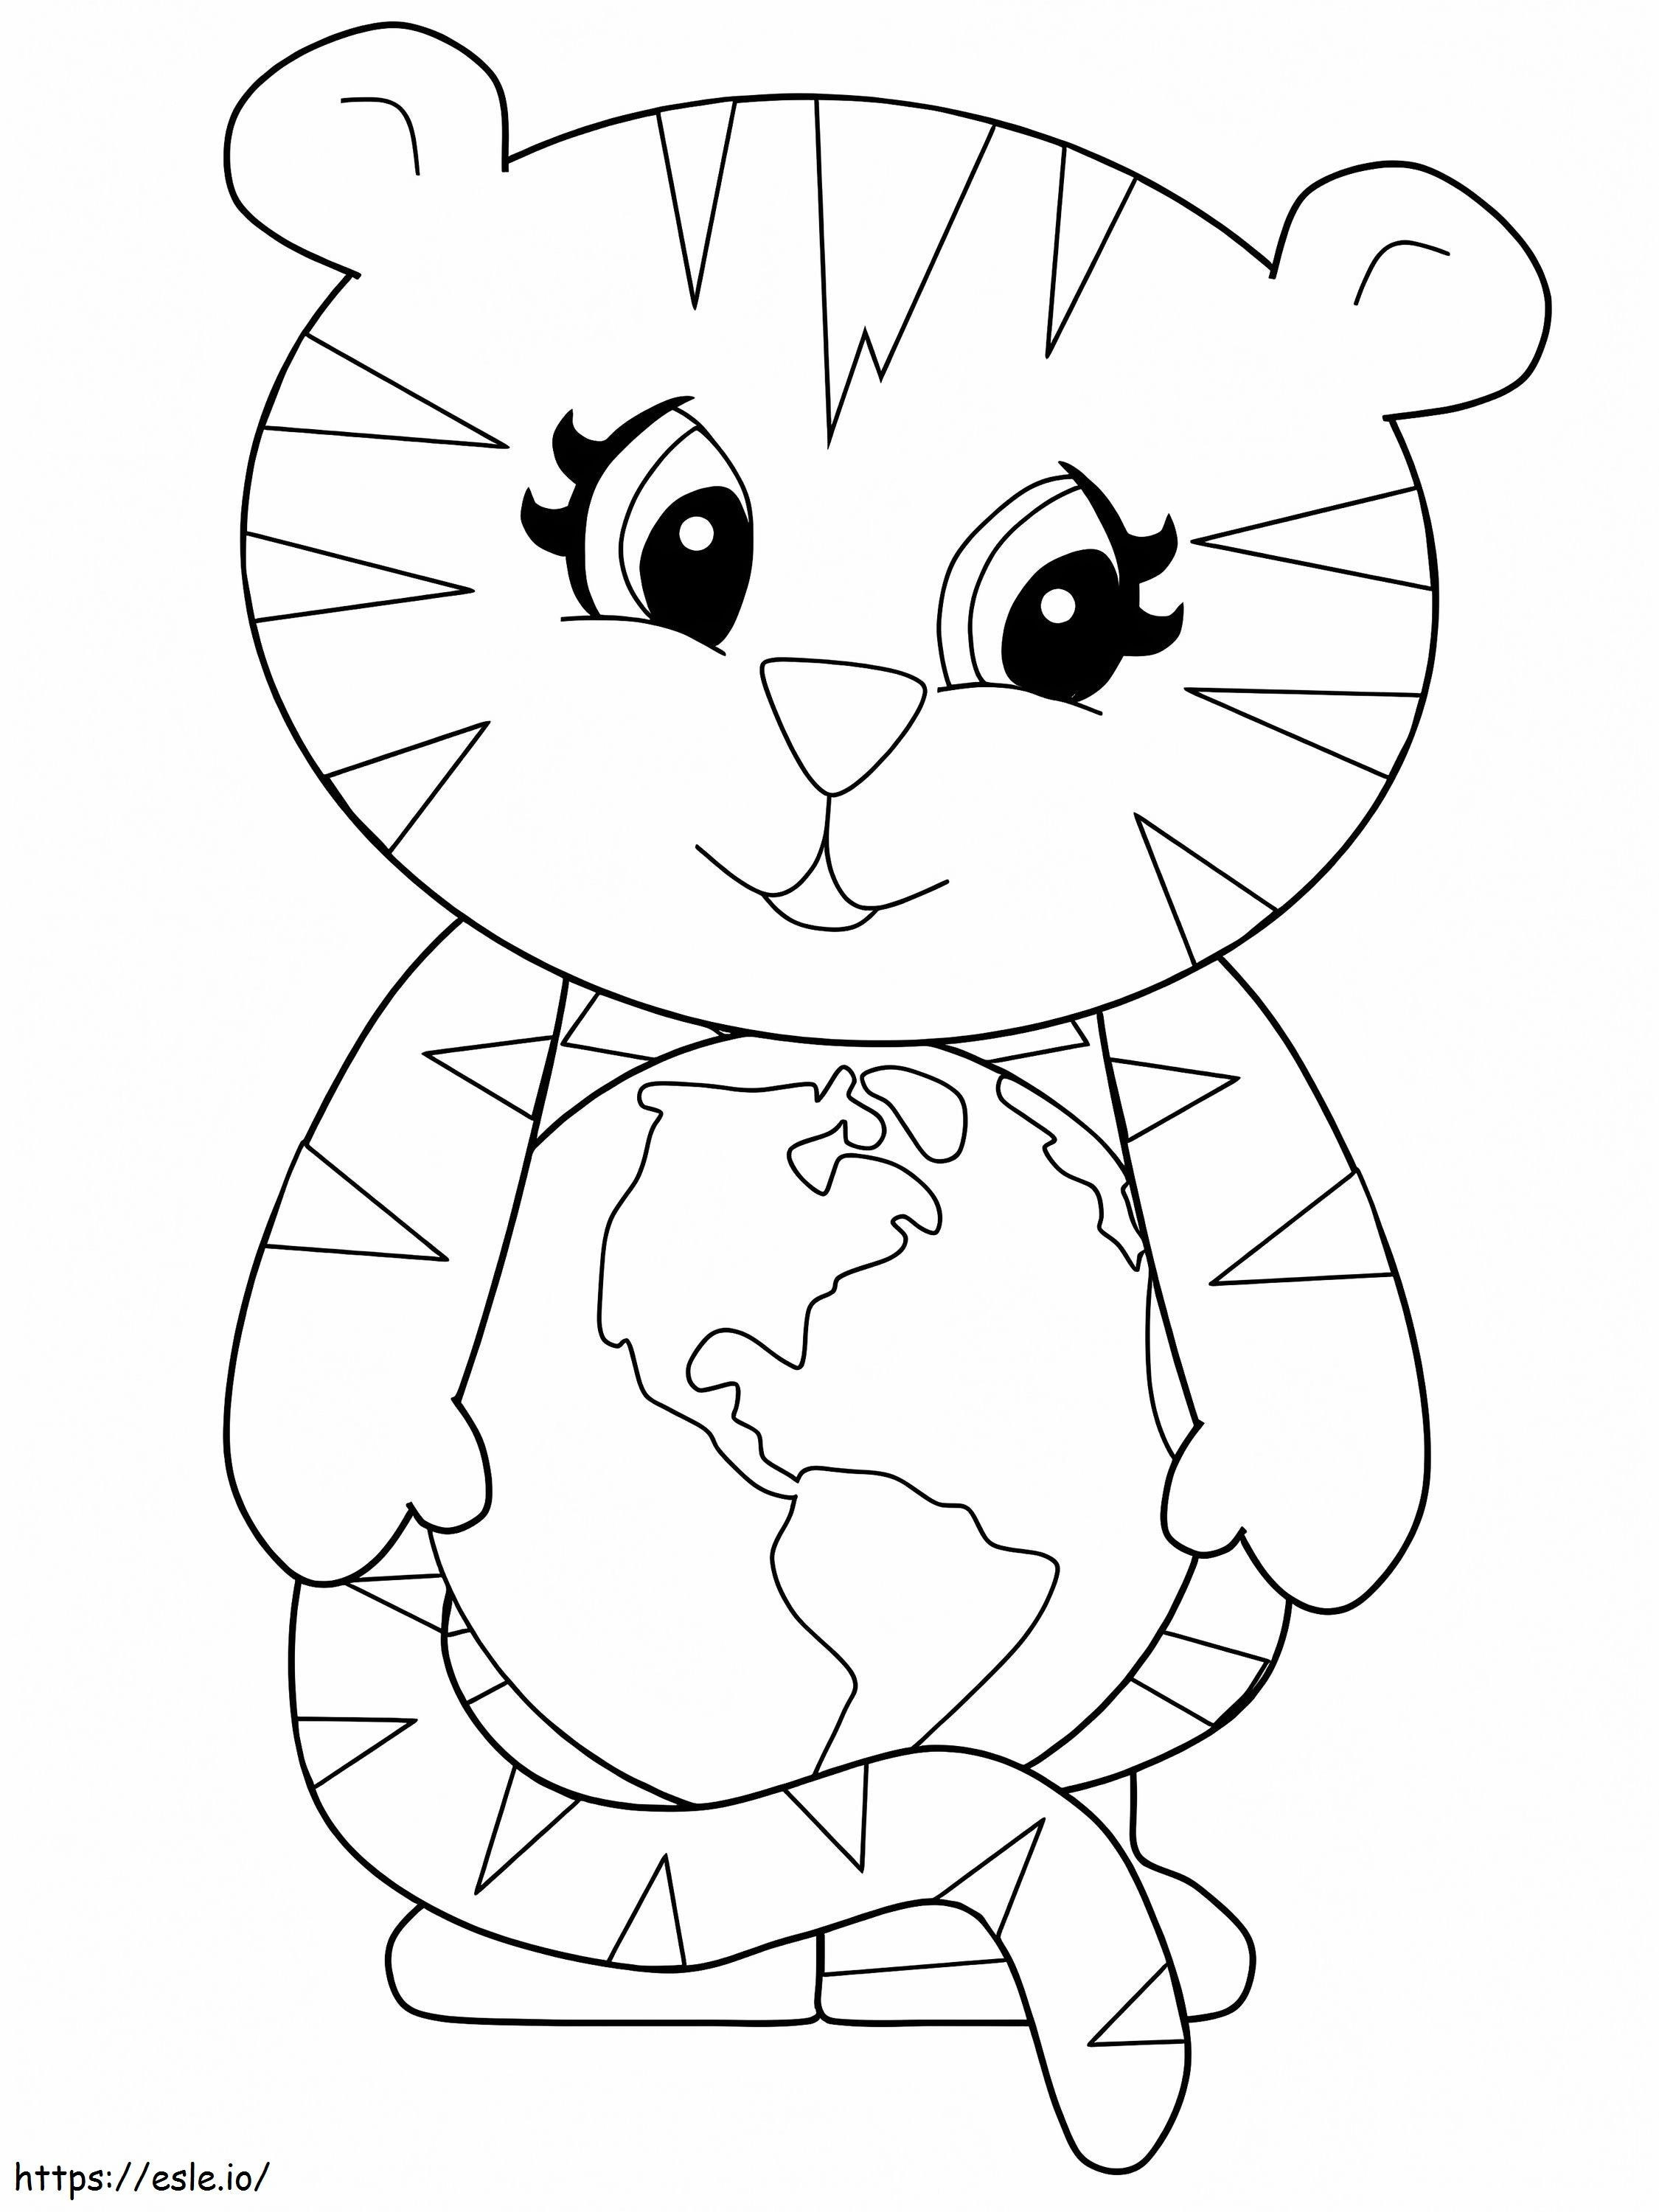 Cute Tiger And Earth Globe coloring page